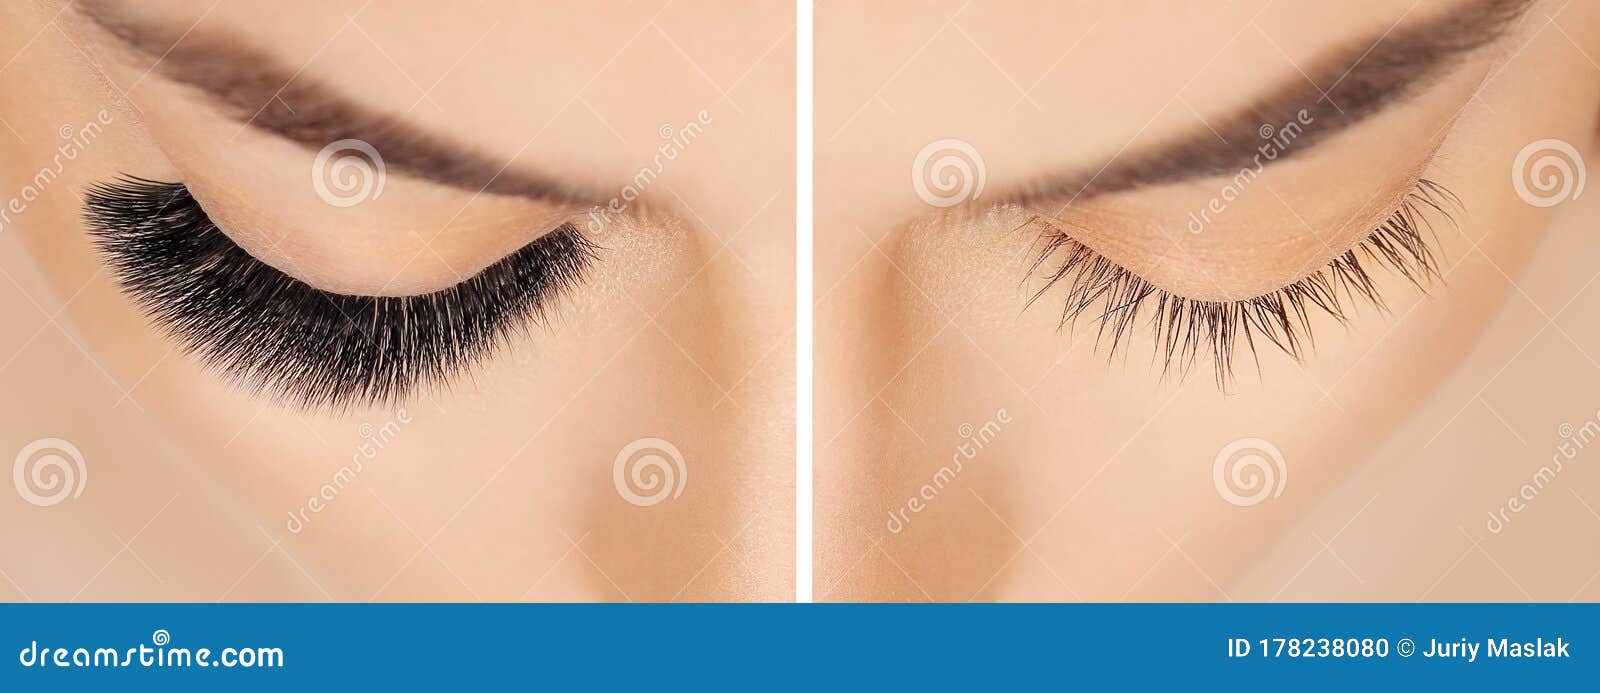 eyelash extension procedure before after. false eyelashes. close up portrait of woman eyes with long lashes in beauty